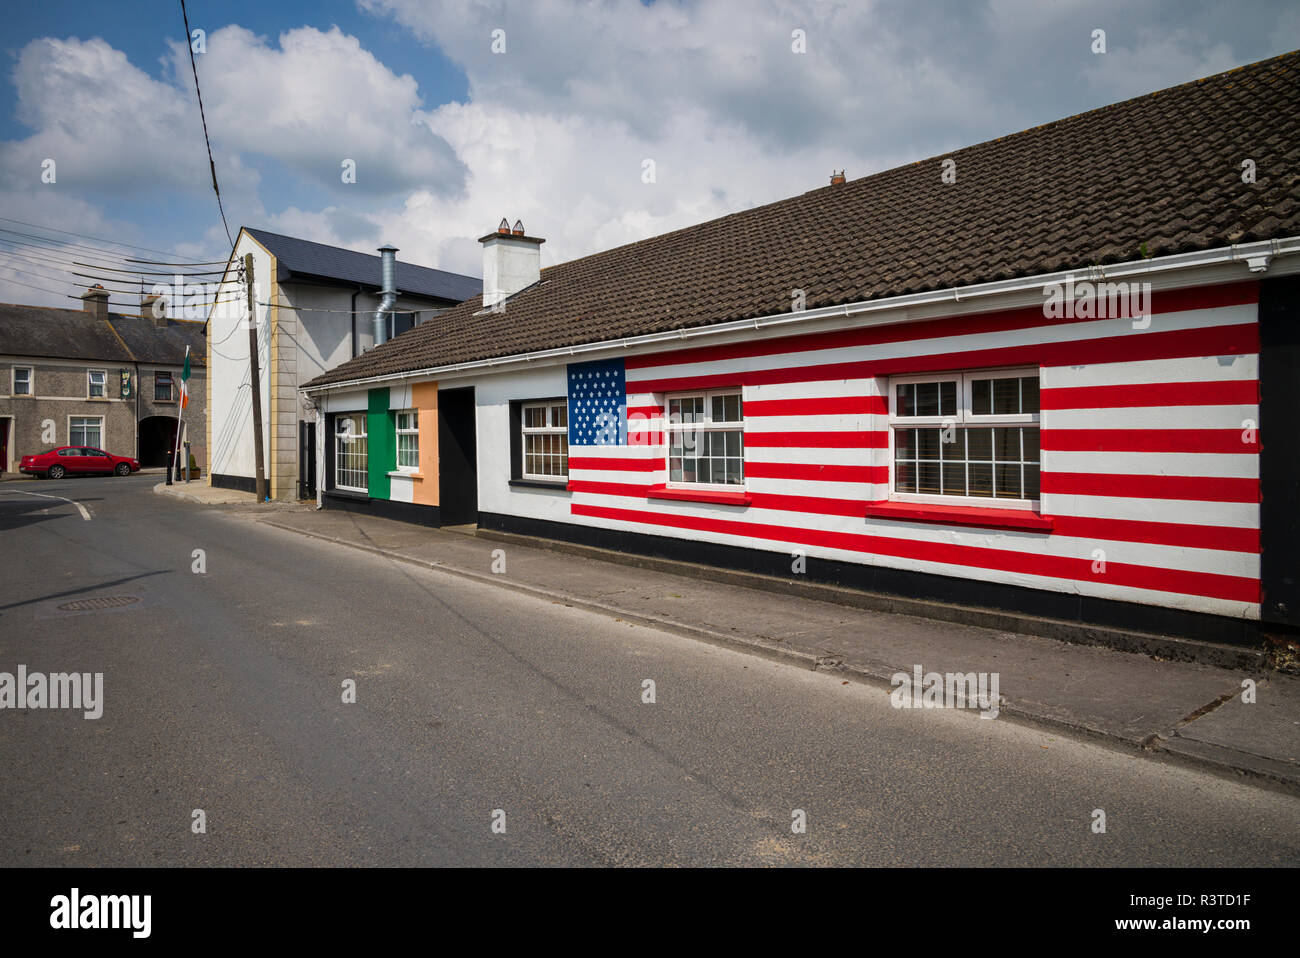 Ireland, County Offaly, Moneygall, house painted with US flags for visit by US President Barack Obama Stock Photo